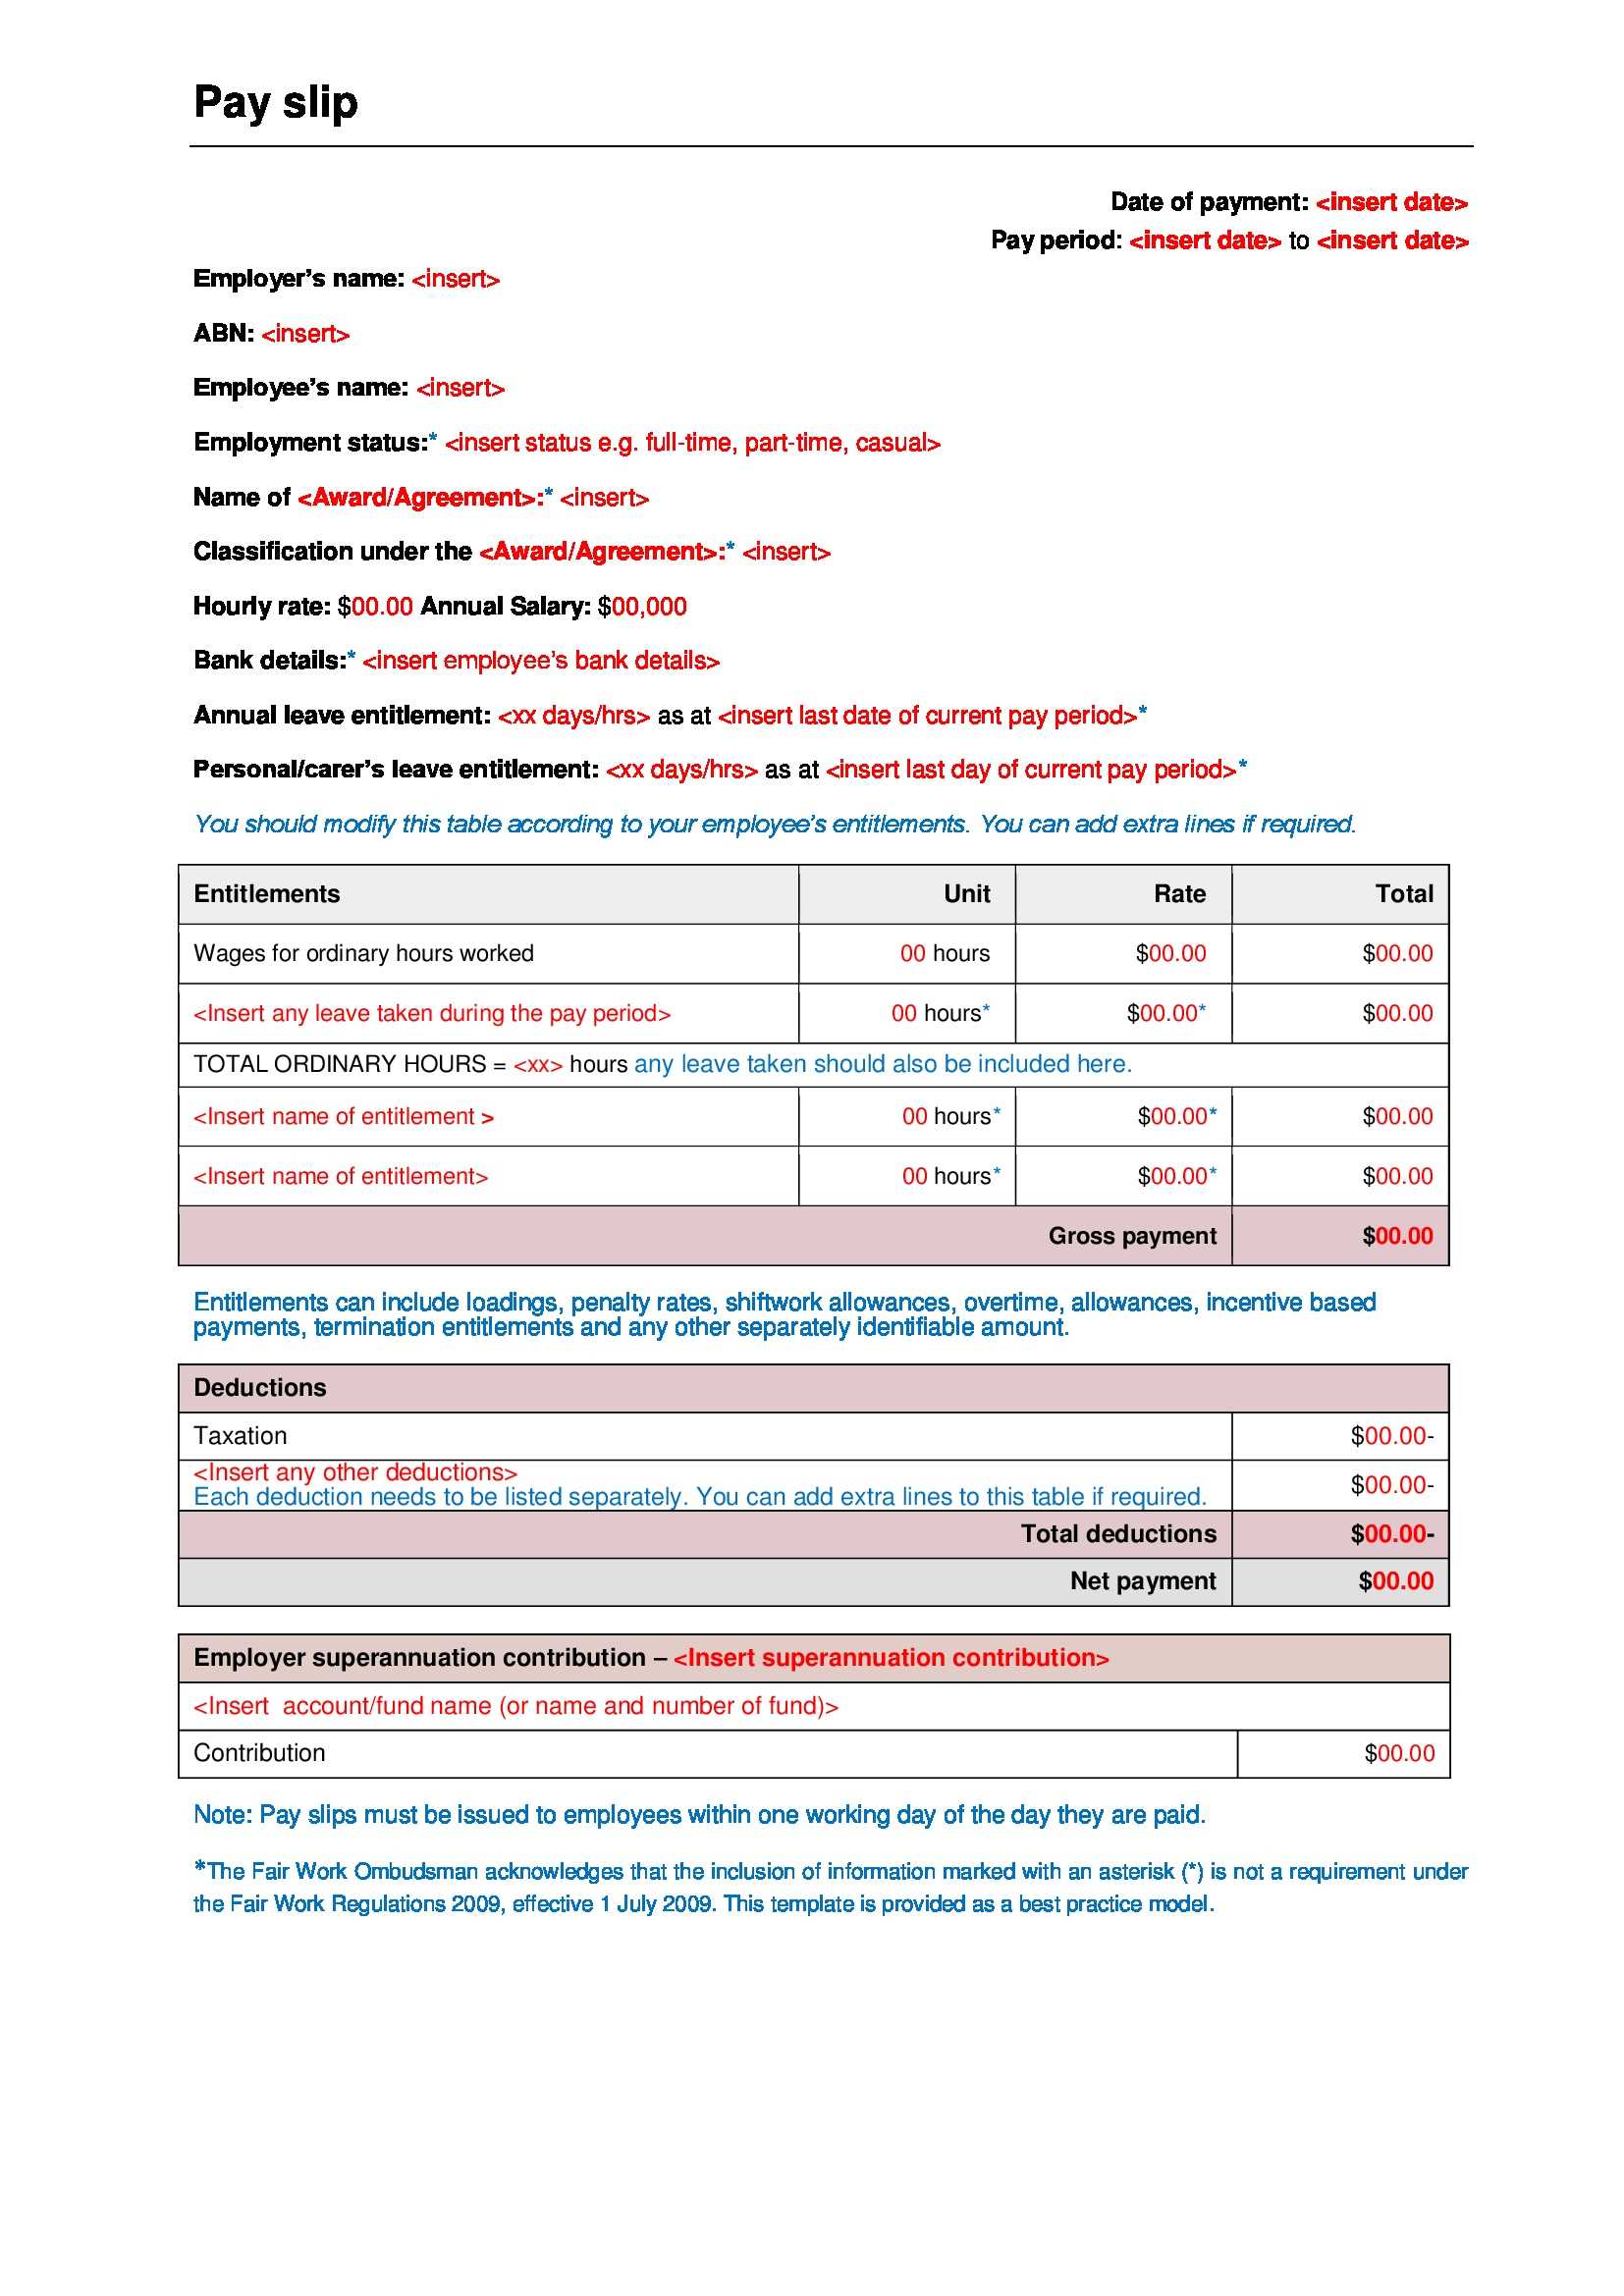 Payslip Templates | 28+ Free Printable Excel & Word Formats With Blank Payslip Template